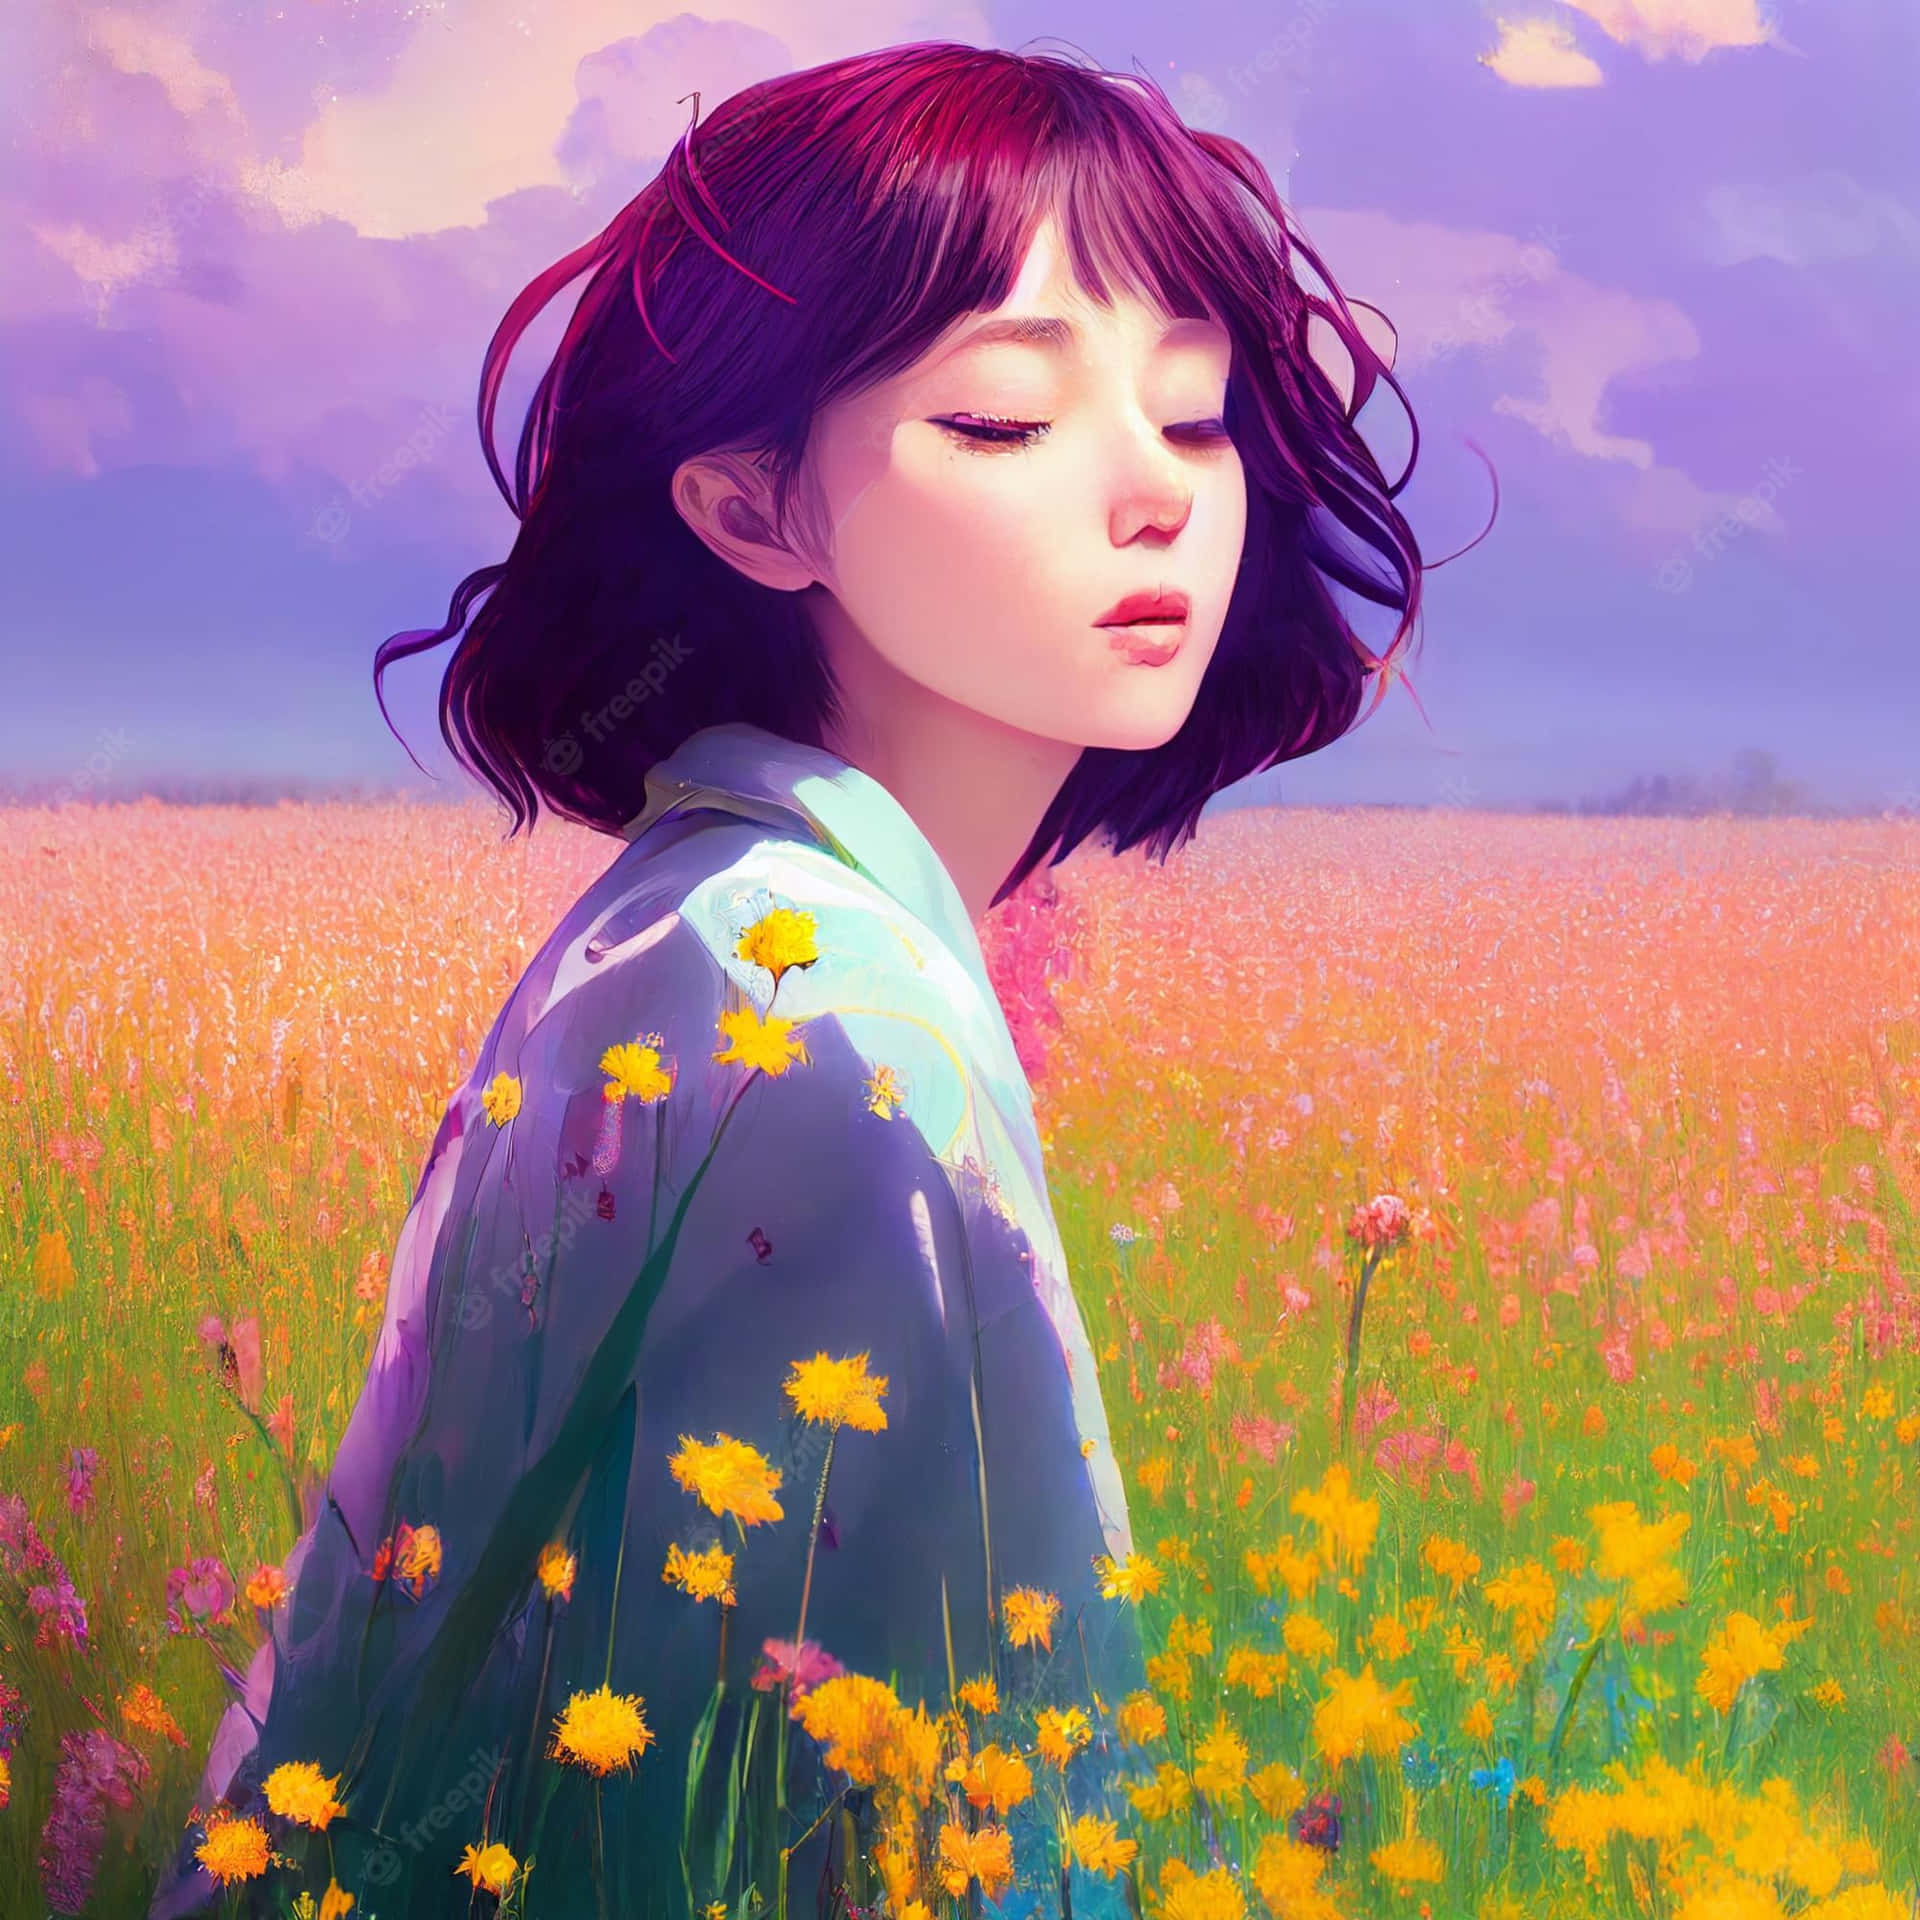 Korean Anime Girl On A Field Of Flowers Background